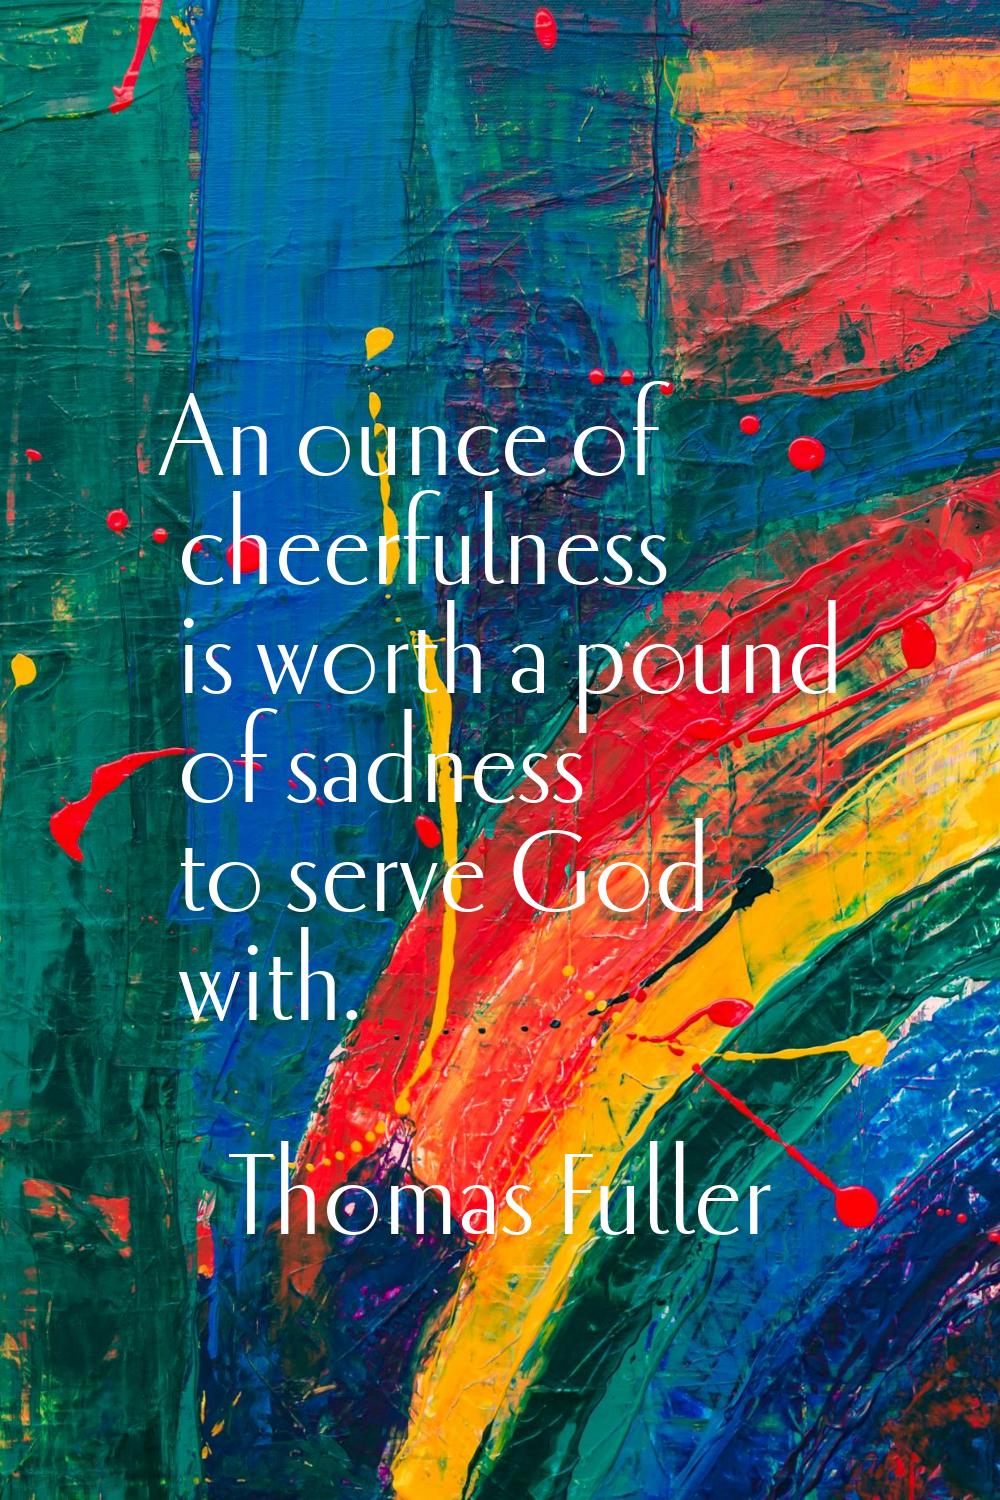 An ounce of cheerfulness is worth a pound of sadness to serve God with.